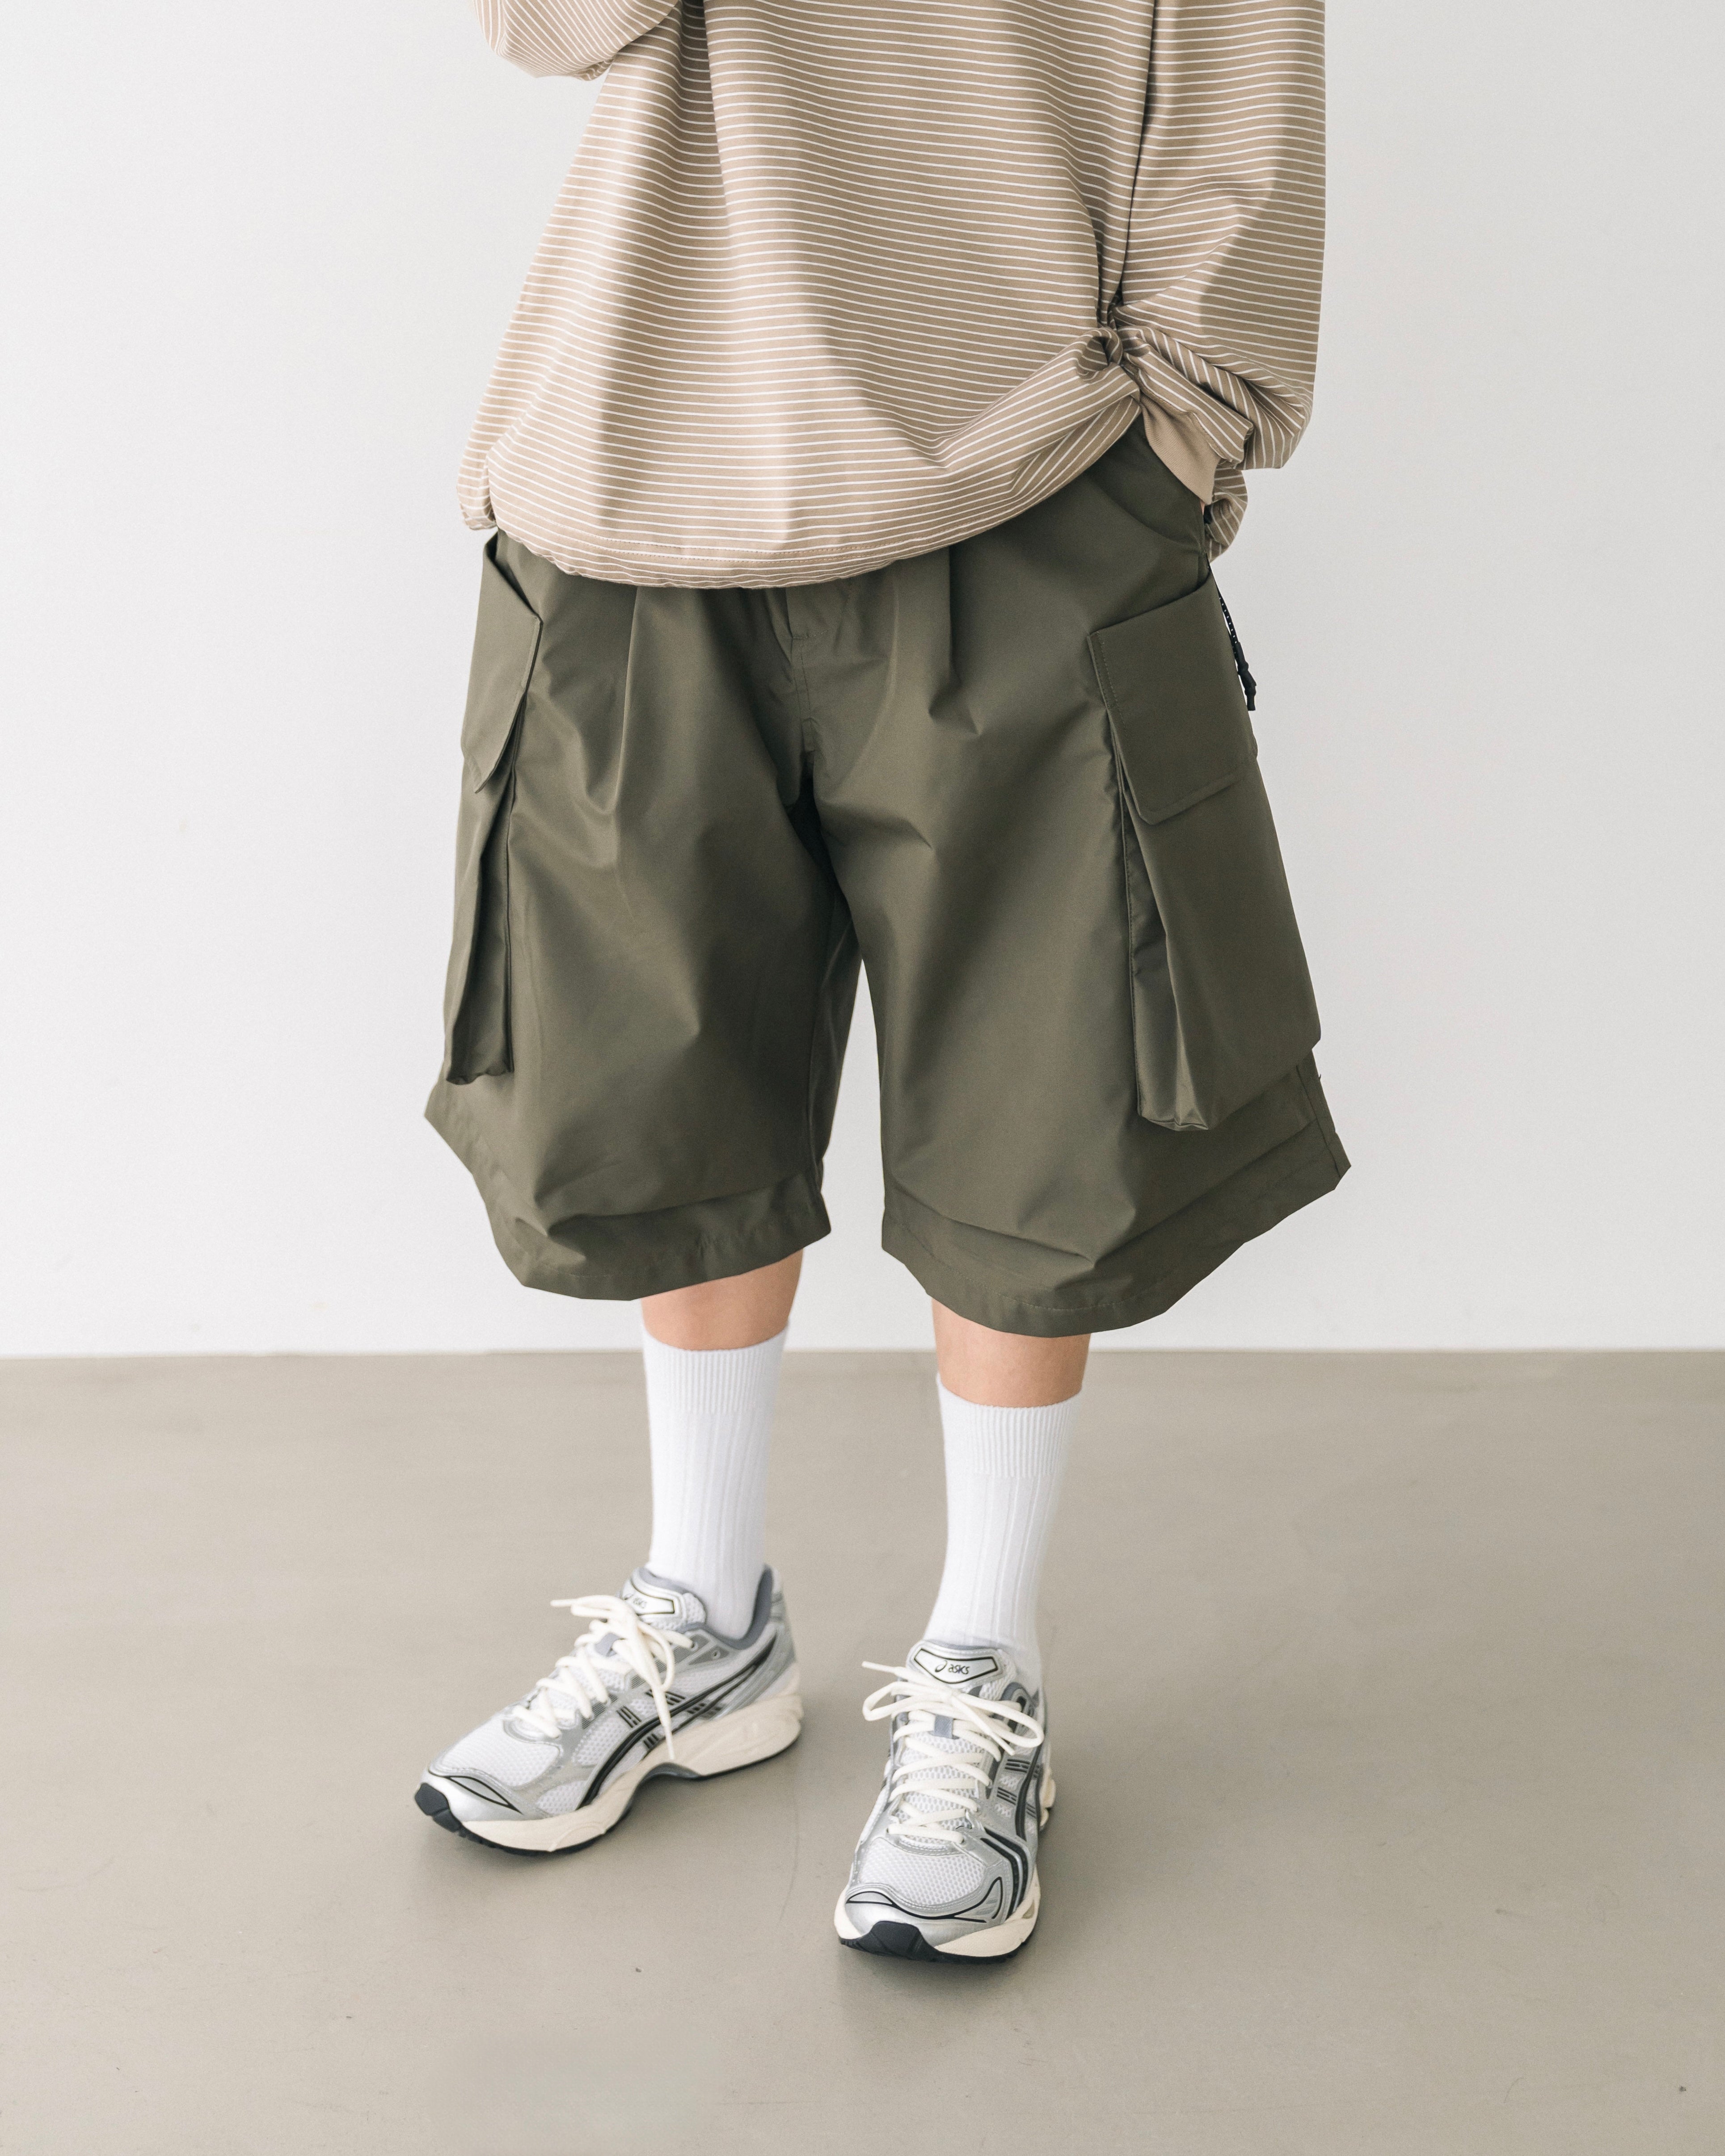 【5.1 WED 20:00- In stock】+phenix WINDSTOPPER® by GORE-TEX LABS CITY MILITARY HALF PANTS